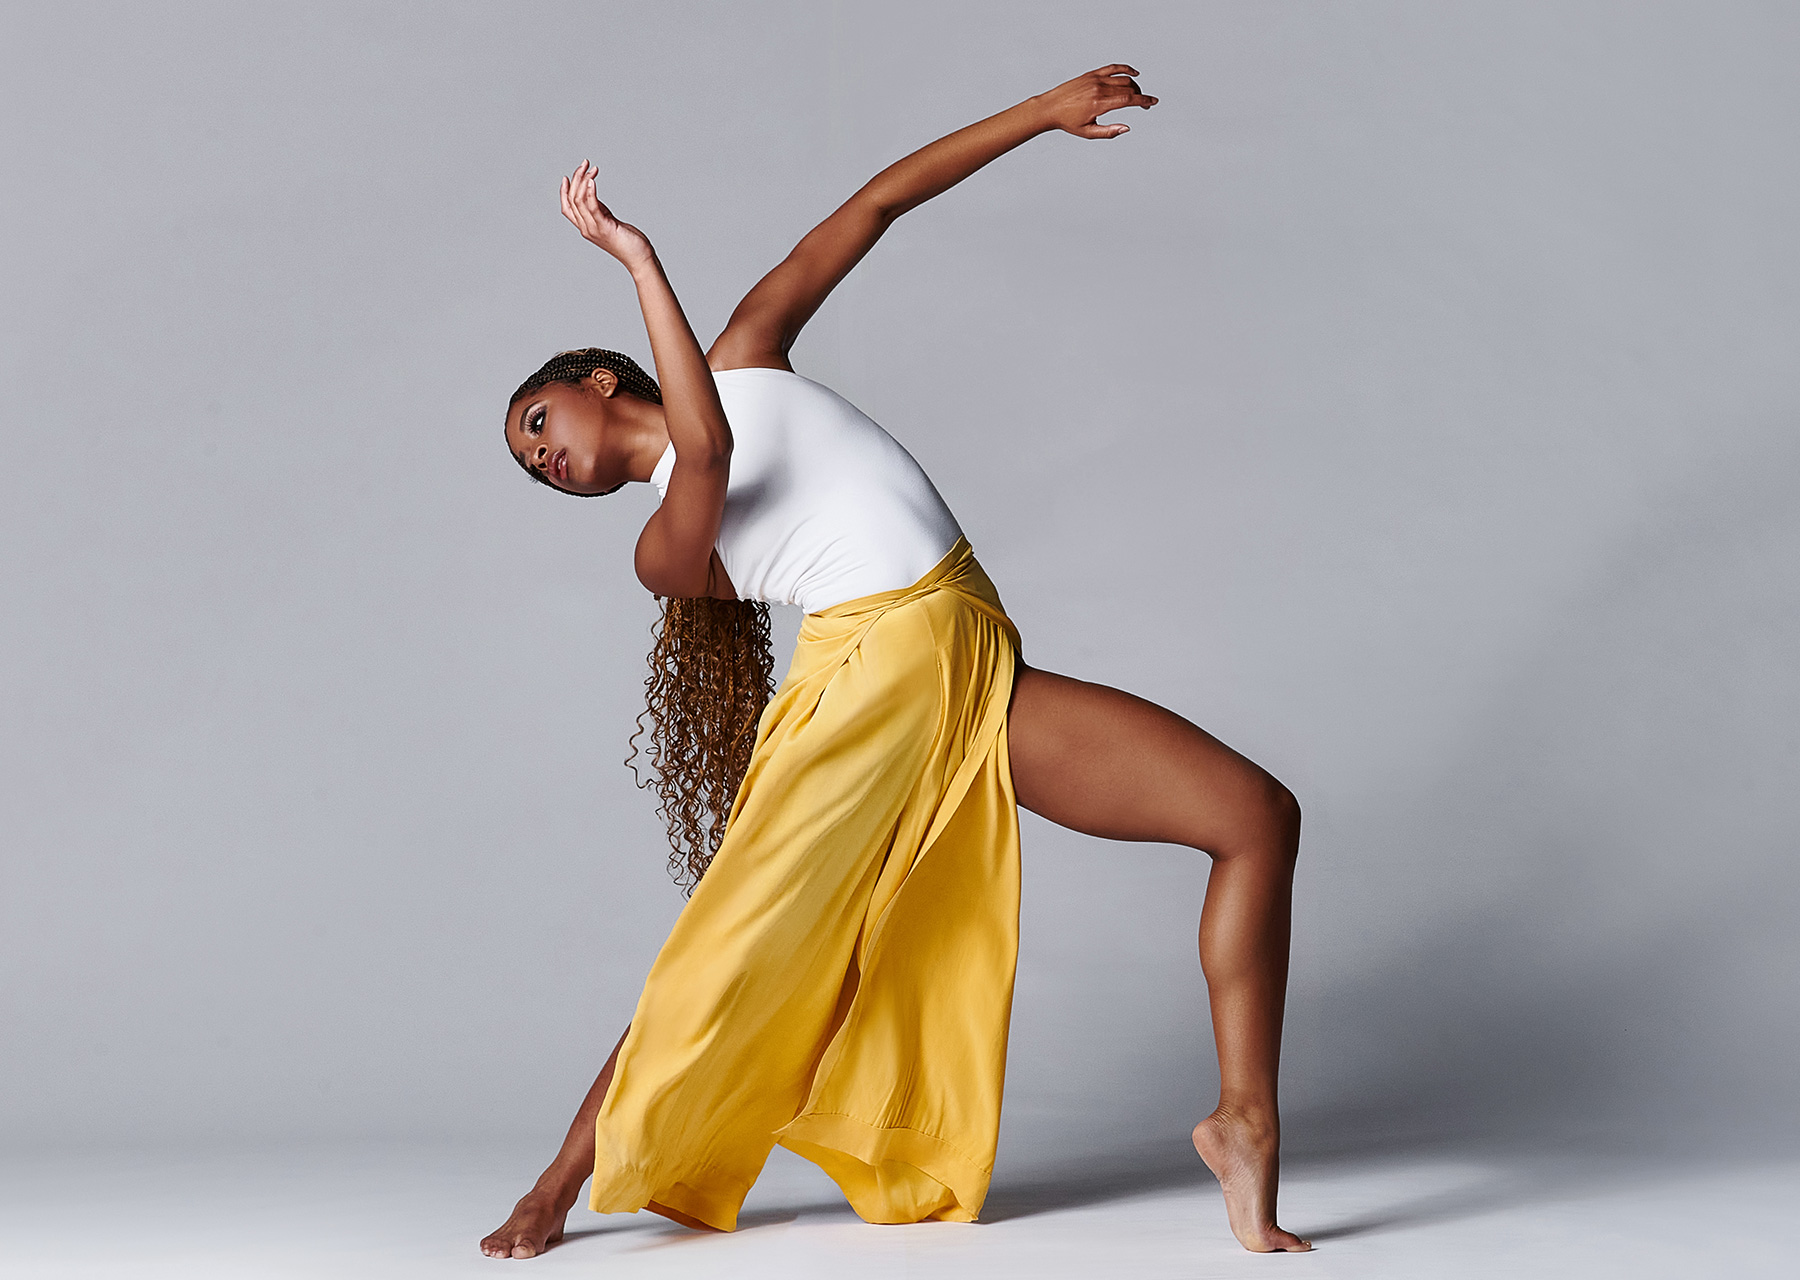 Mason School of Dance student in yellow and white in a pose against a gray background